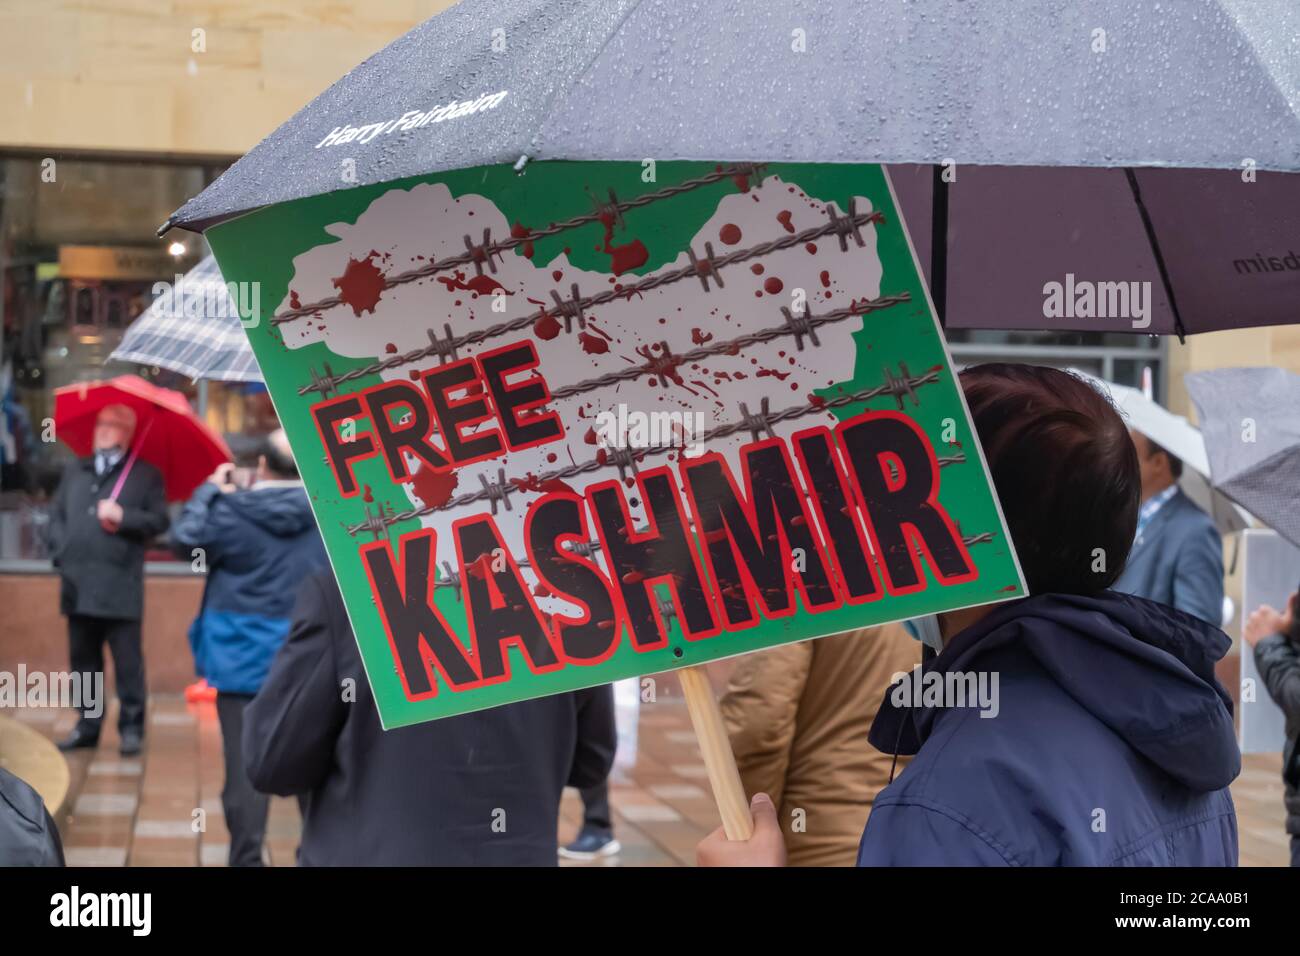 Glasgow, Scotland, UK. 5th August, 2020. A protester holding a sign saying Free Kashmir at a rally on the steps of the Royal Concert Hall against human rights violations and atrocities in Kashmir at the hands of the Indian Occupation Forces. Credit: Skully/Alamy Live News Stock Photo